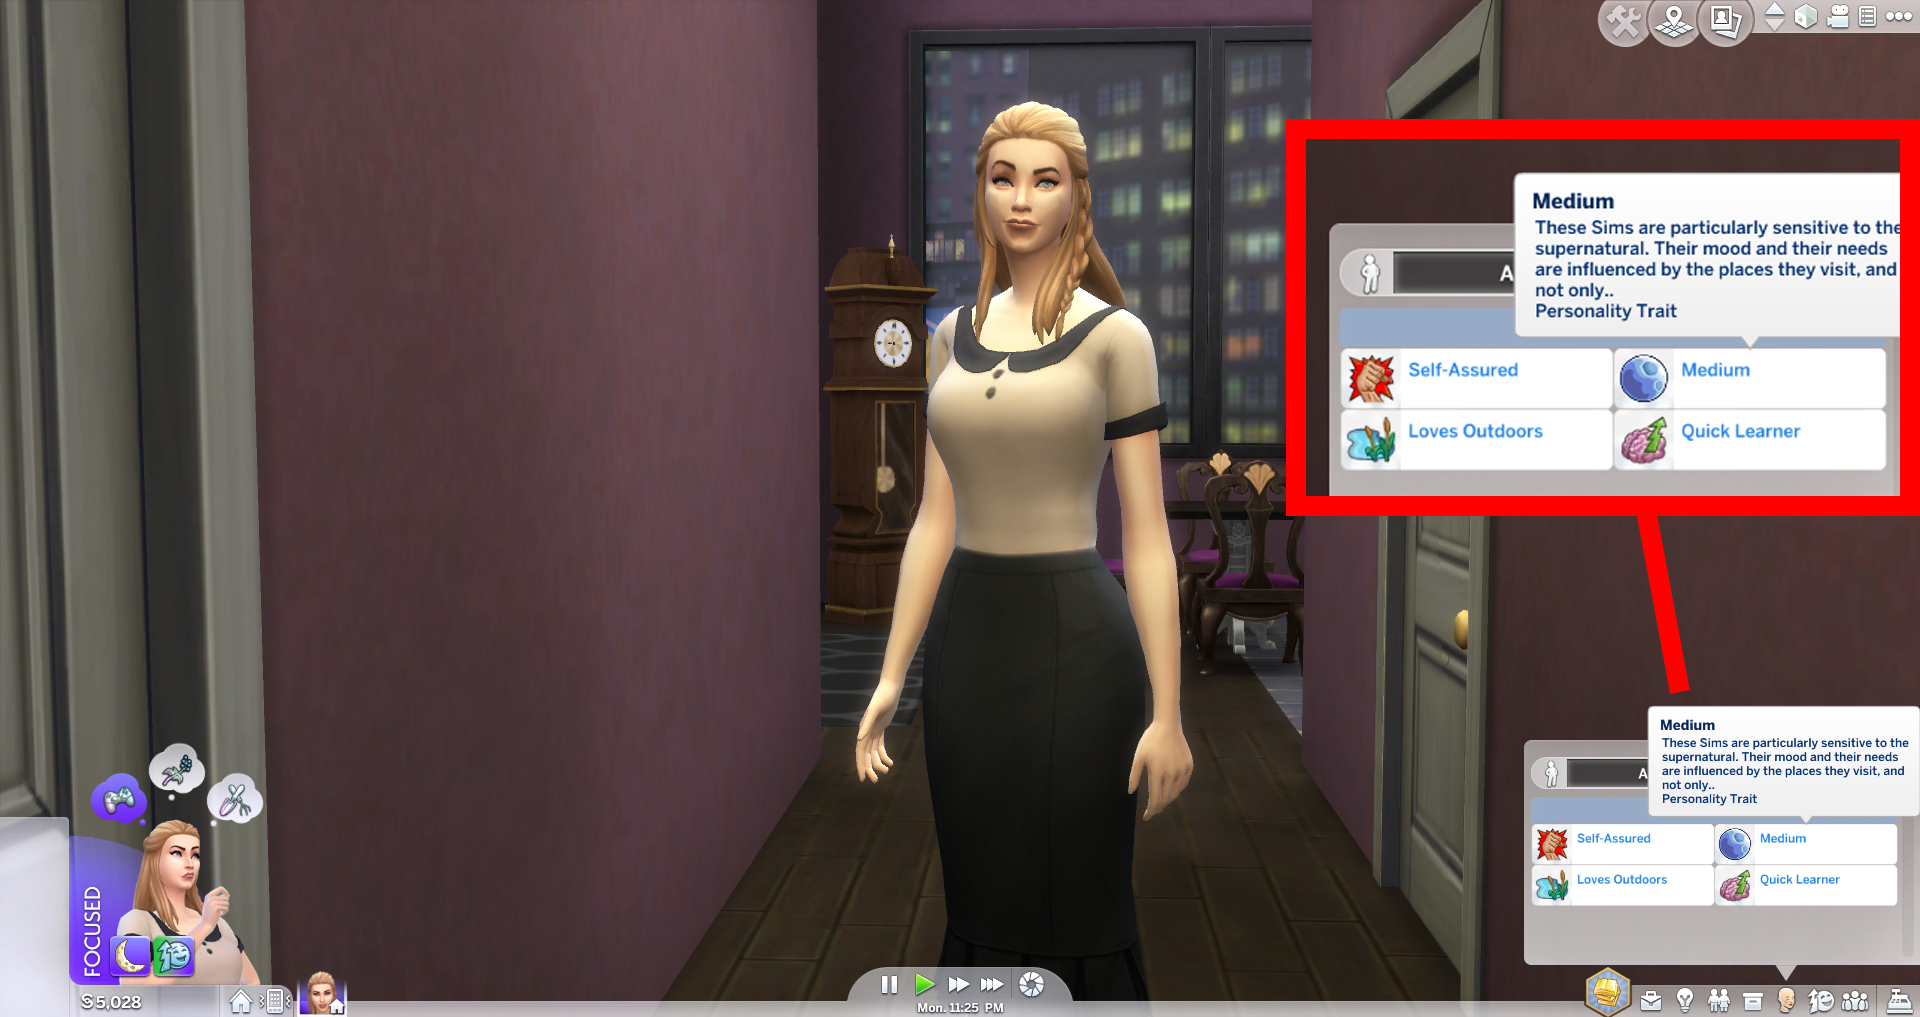 The sims 4 psychic mod